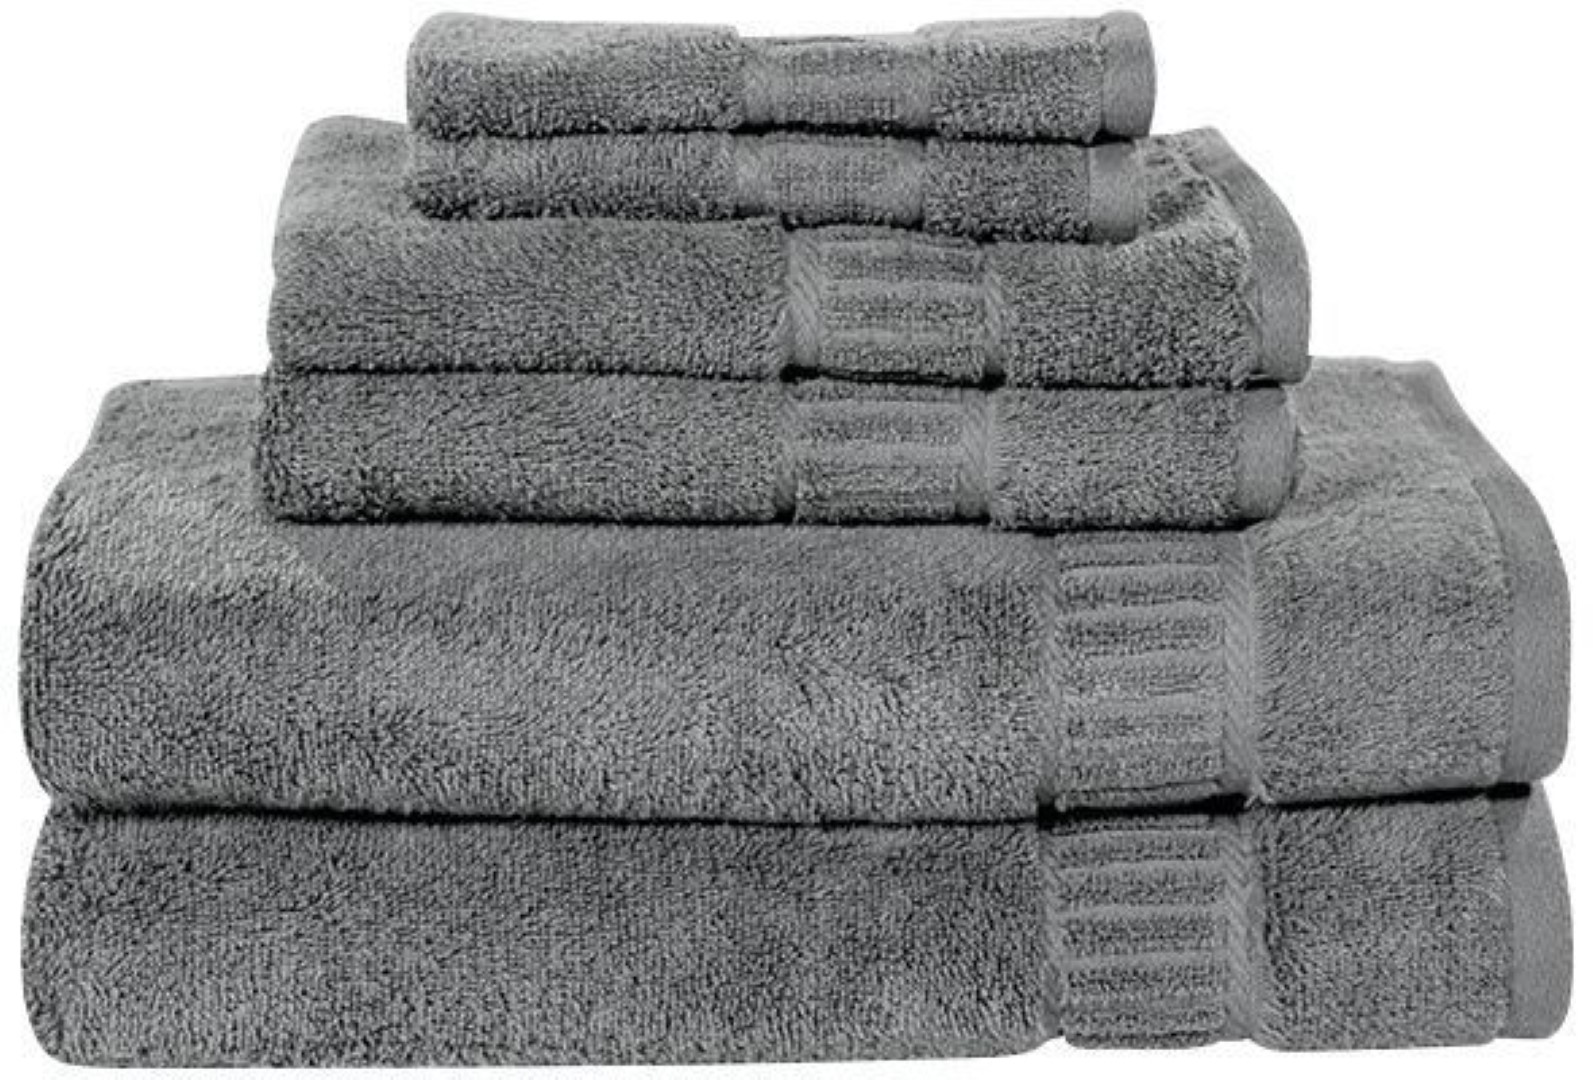 MyPillow on Instagram: Introducing MyTowels™ 6-Piece Towel Set